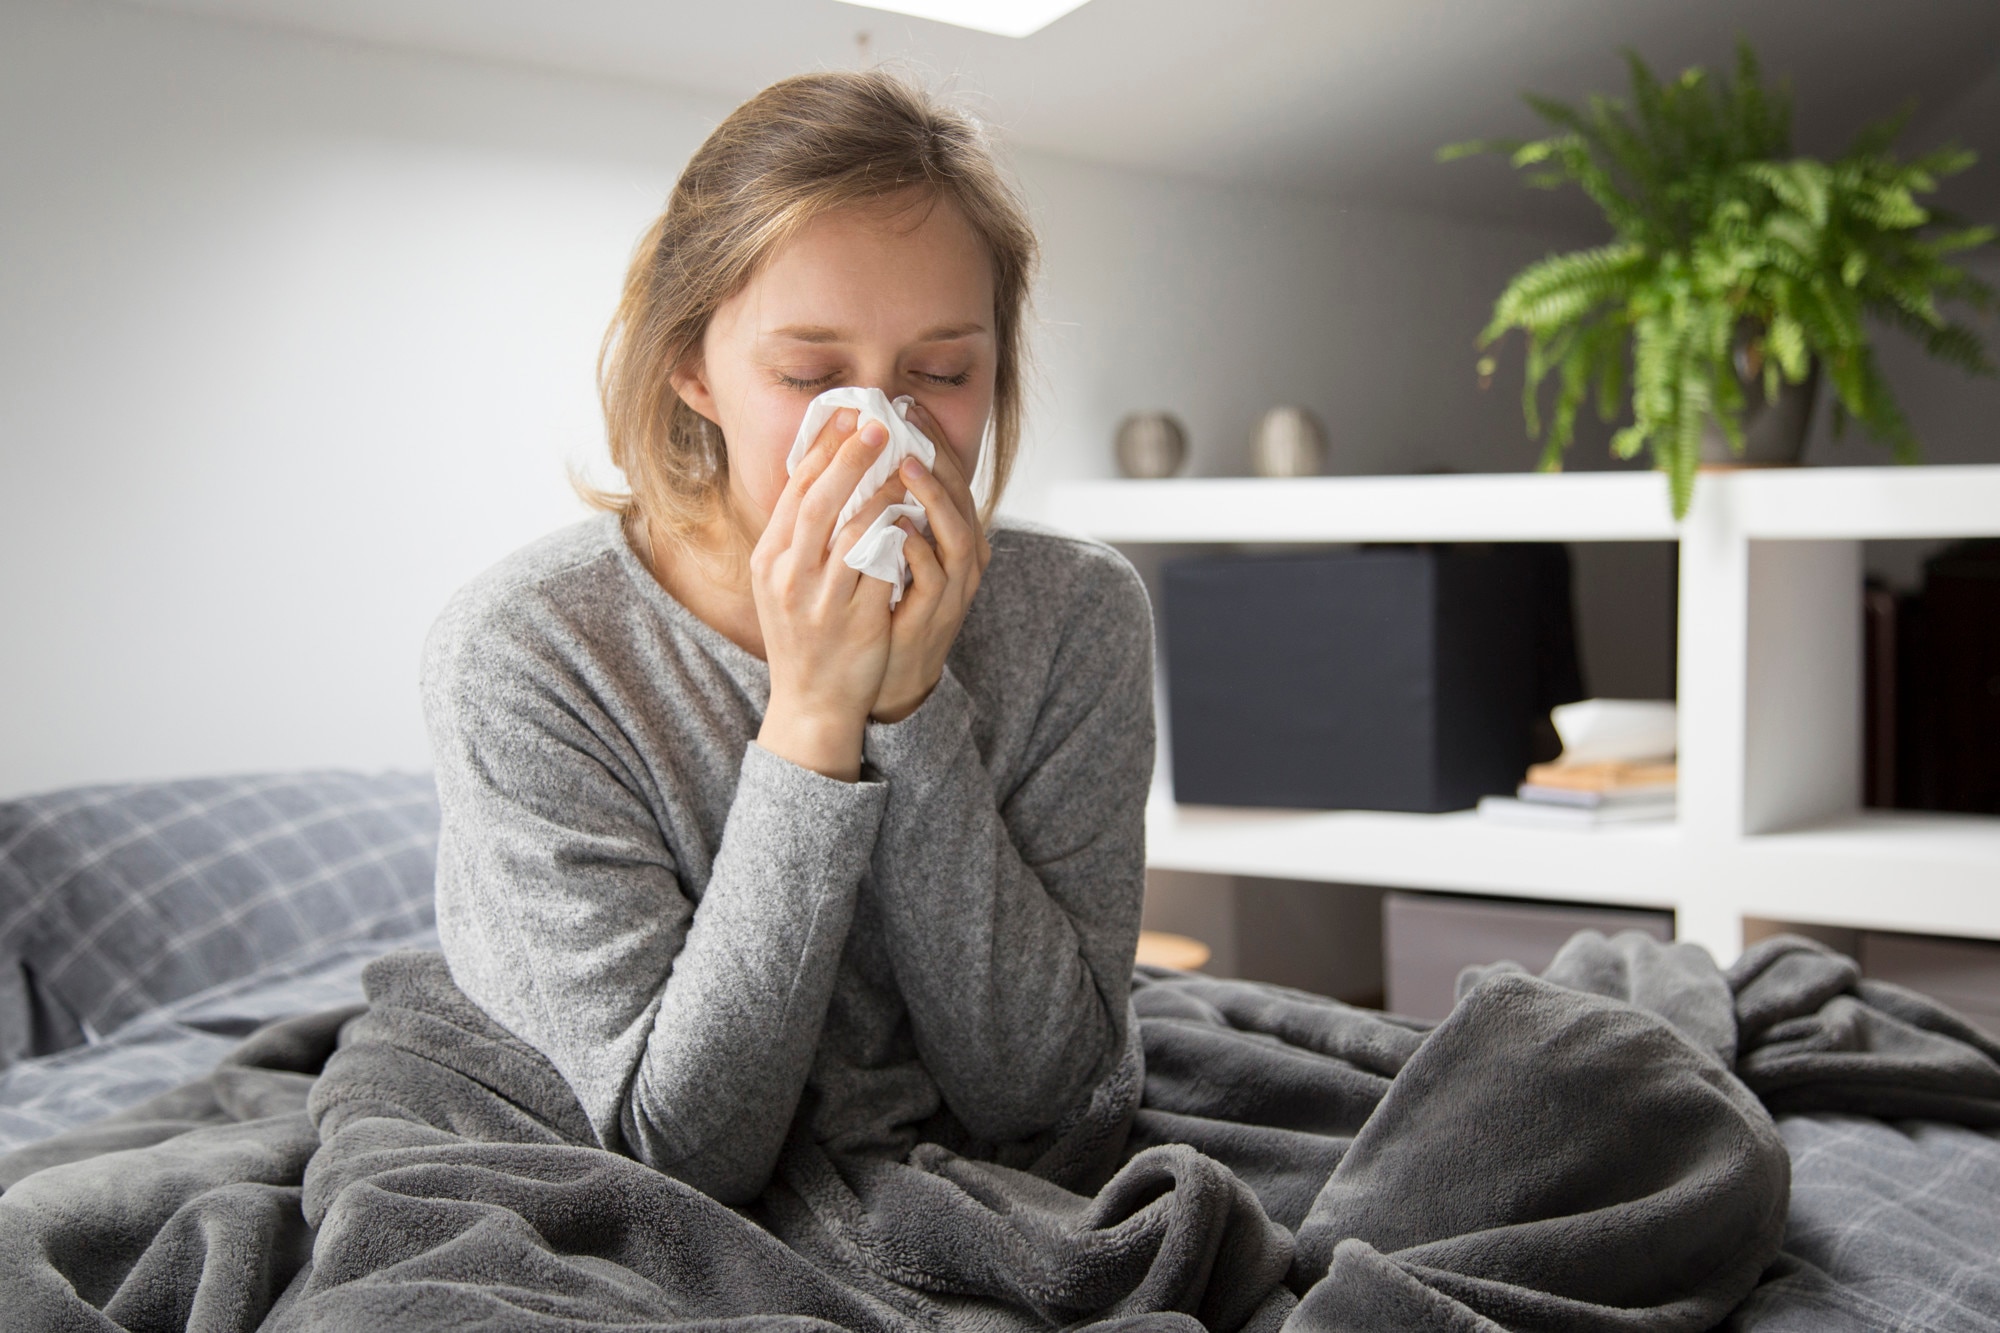 Common Cold Cough Congestion Flu Try These Concoctions and Home Remedies for Relief